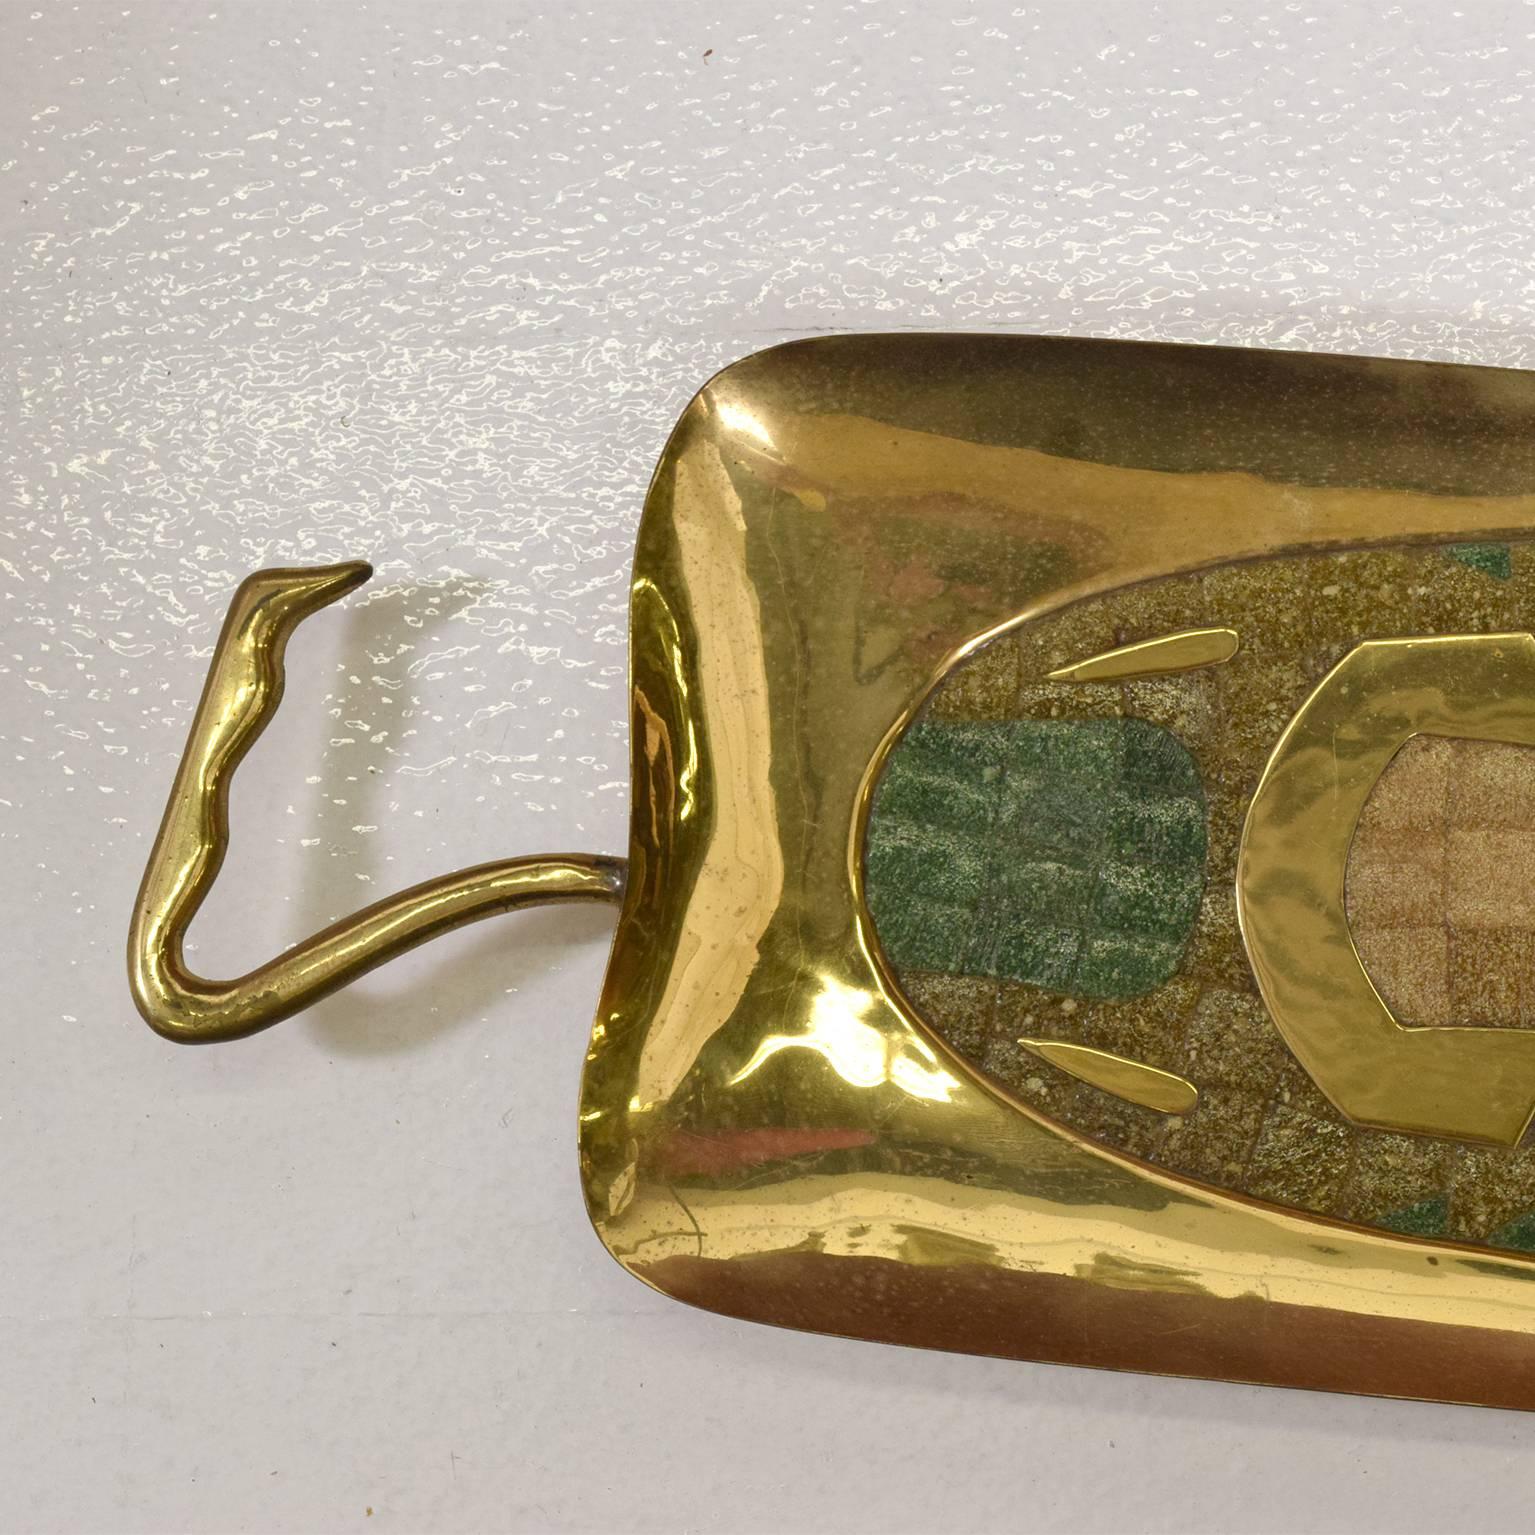 For your consideration a vintage dish in brass and inlay tile decoration by Salvador Teran.
Dimensions: 23 1/4